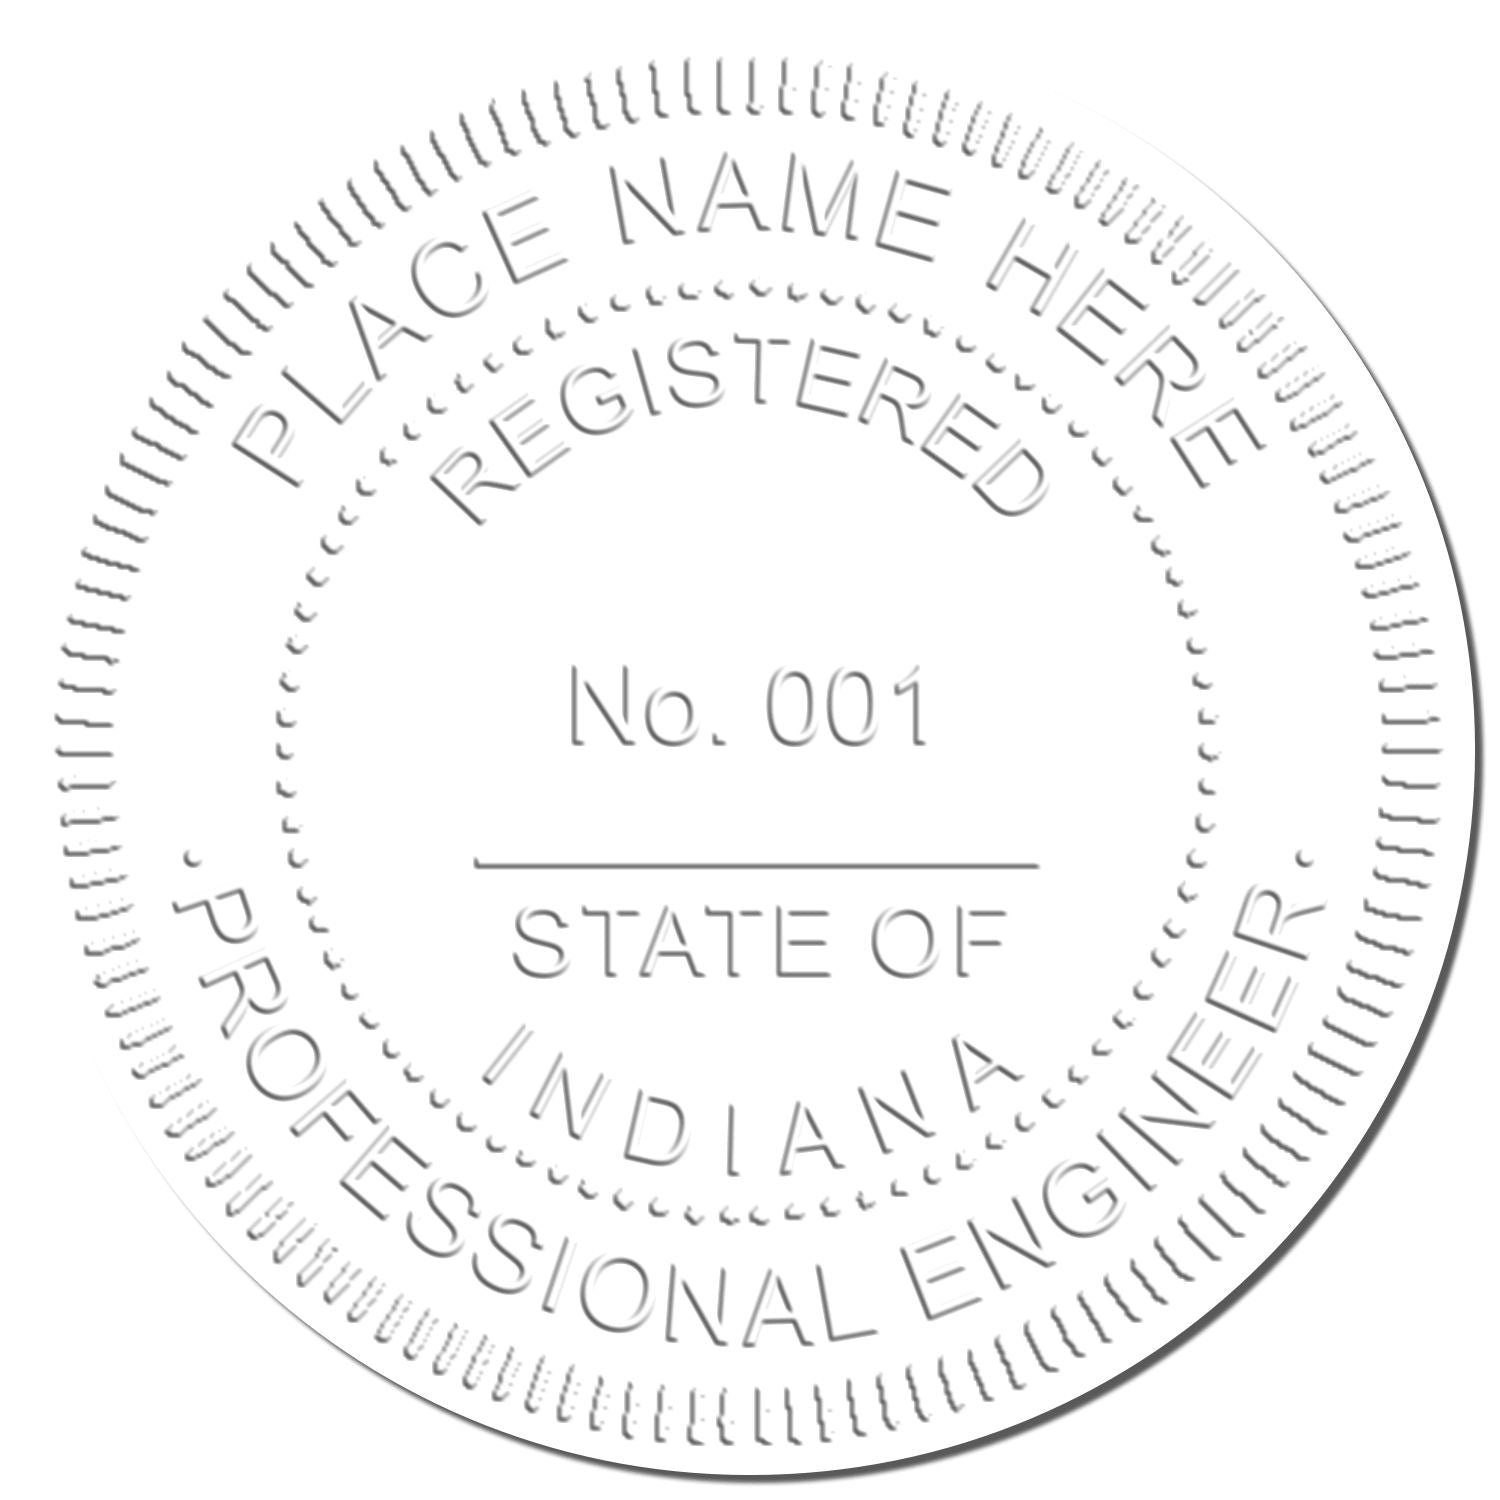 The main image for the Indiana Engineer Desk Seal depicting a sample of the imprint and electronic files